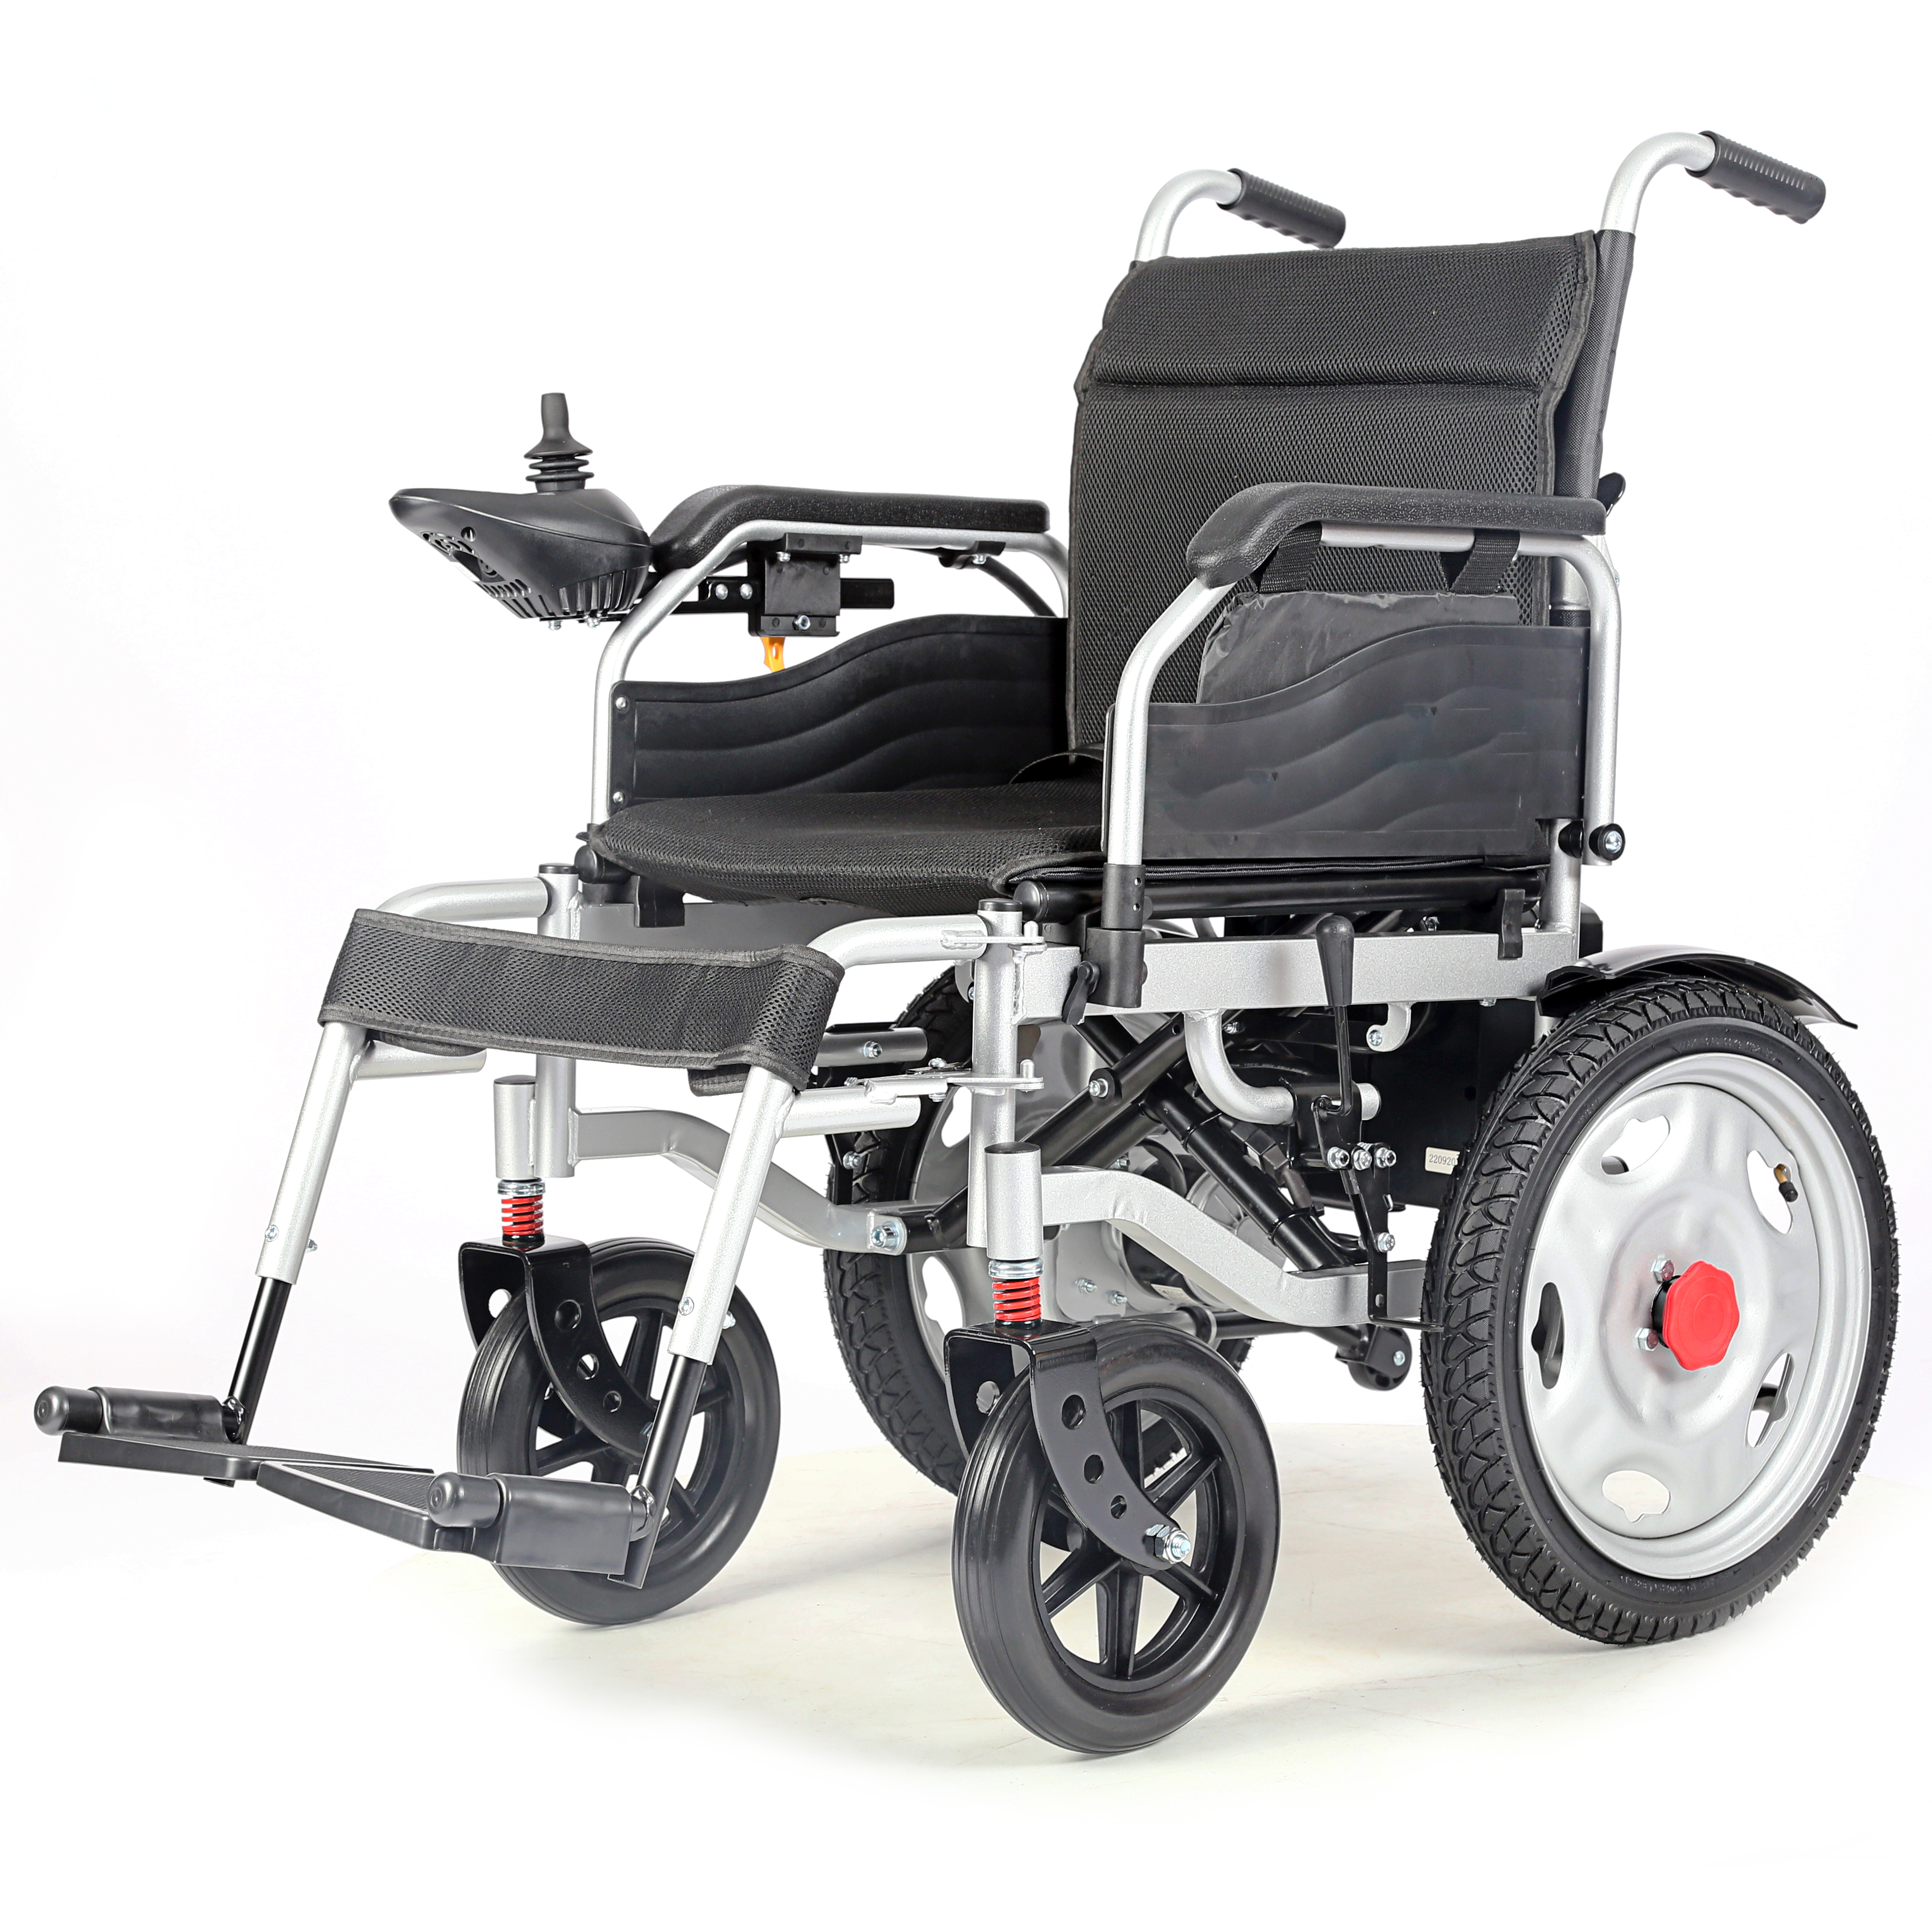 TEW002G Lightweight aluminum power electric folding wheelchair for the handicapped for the disabled